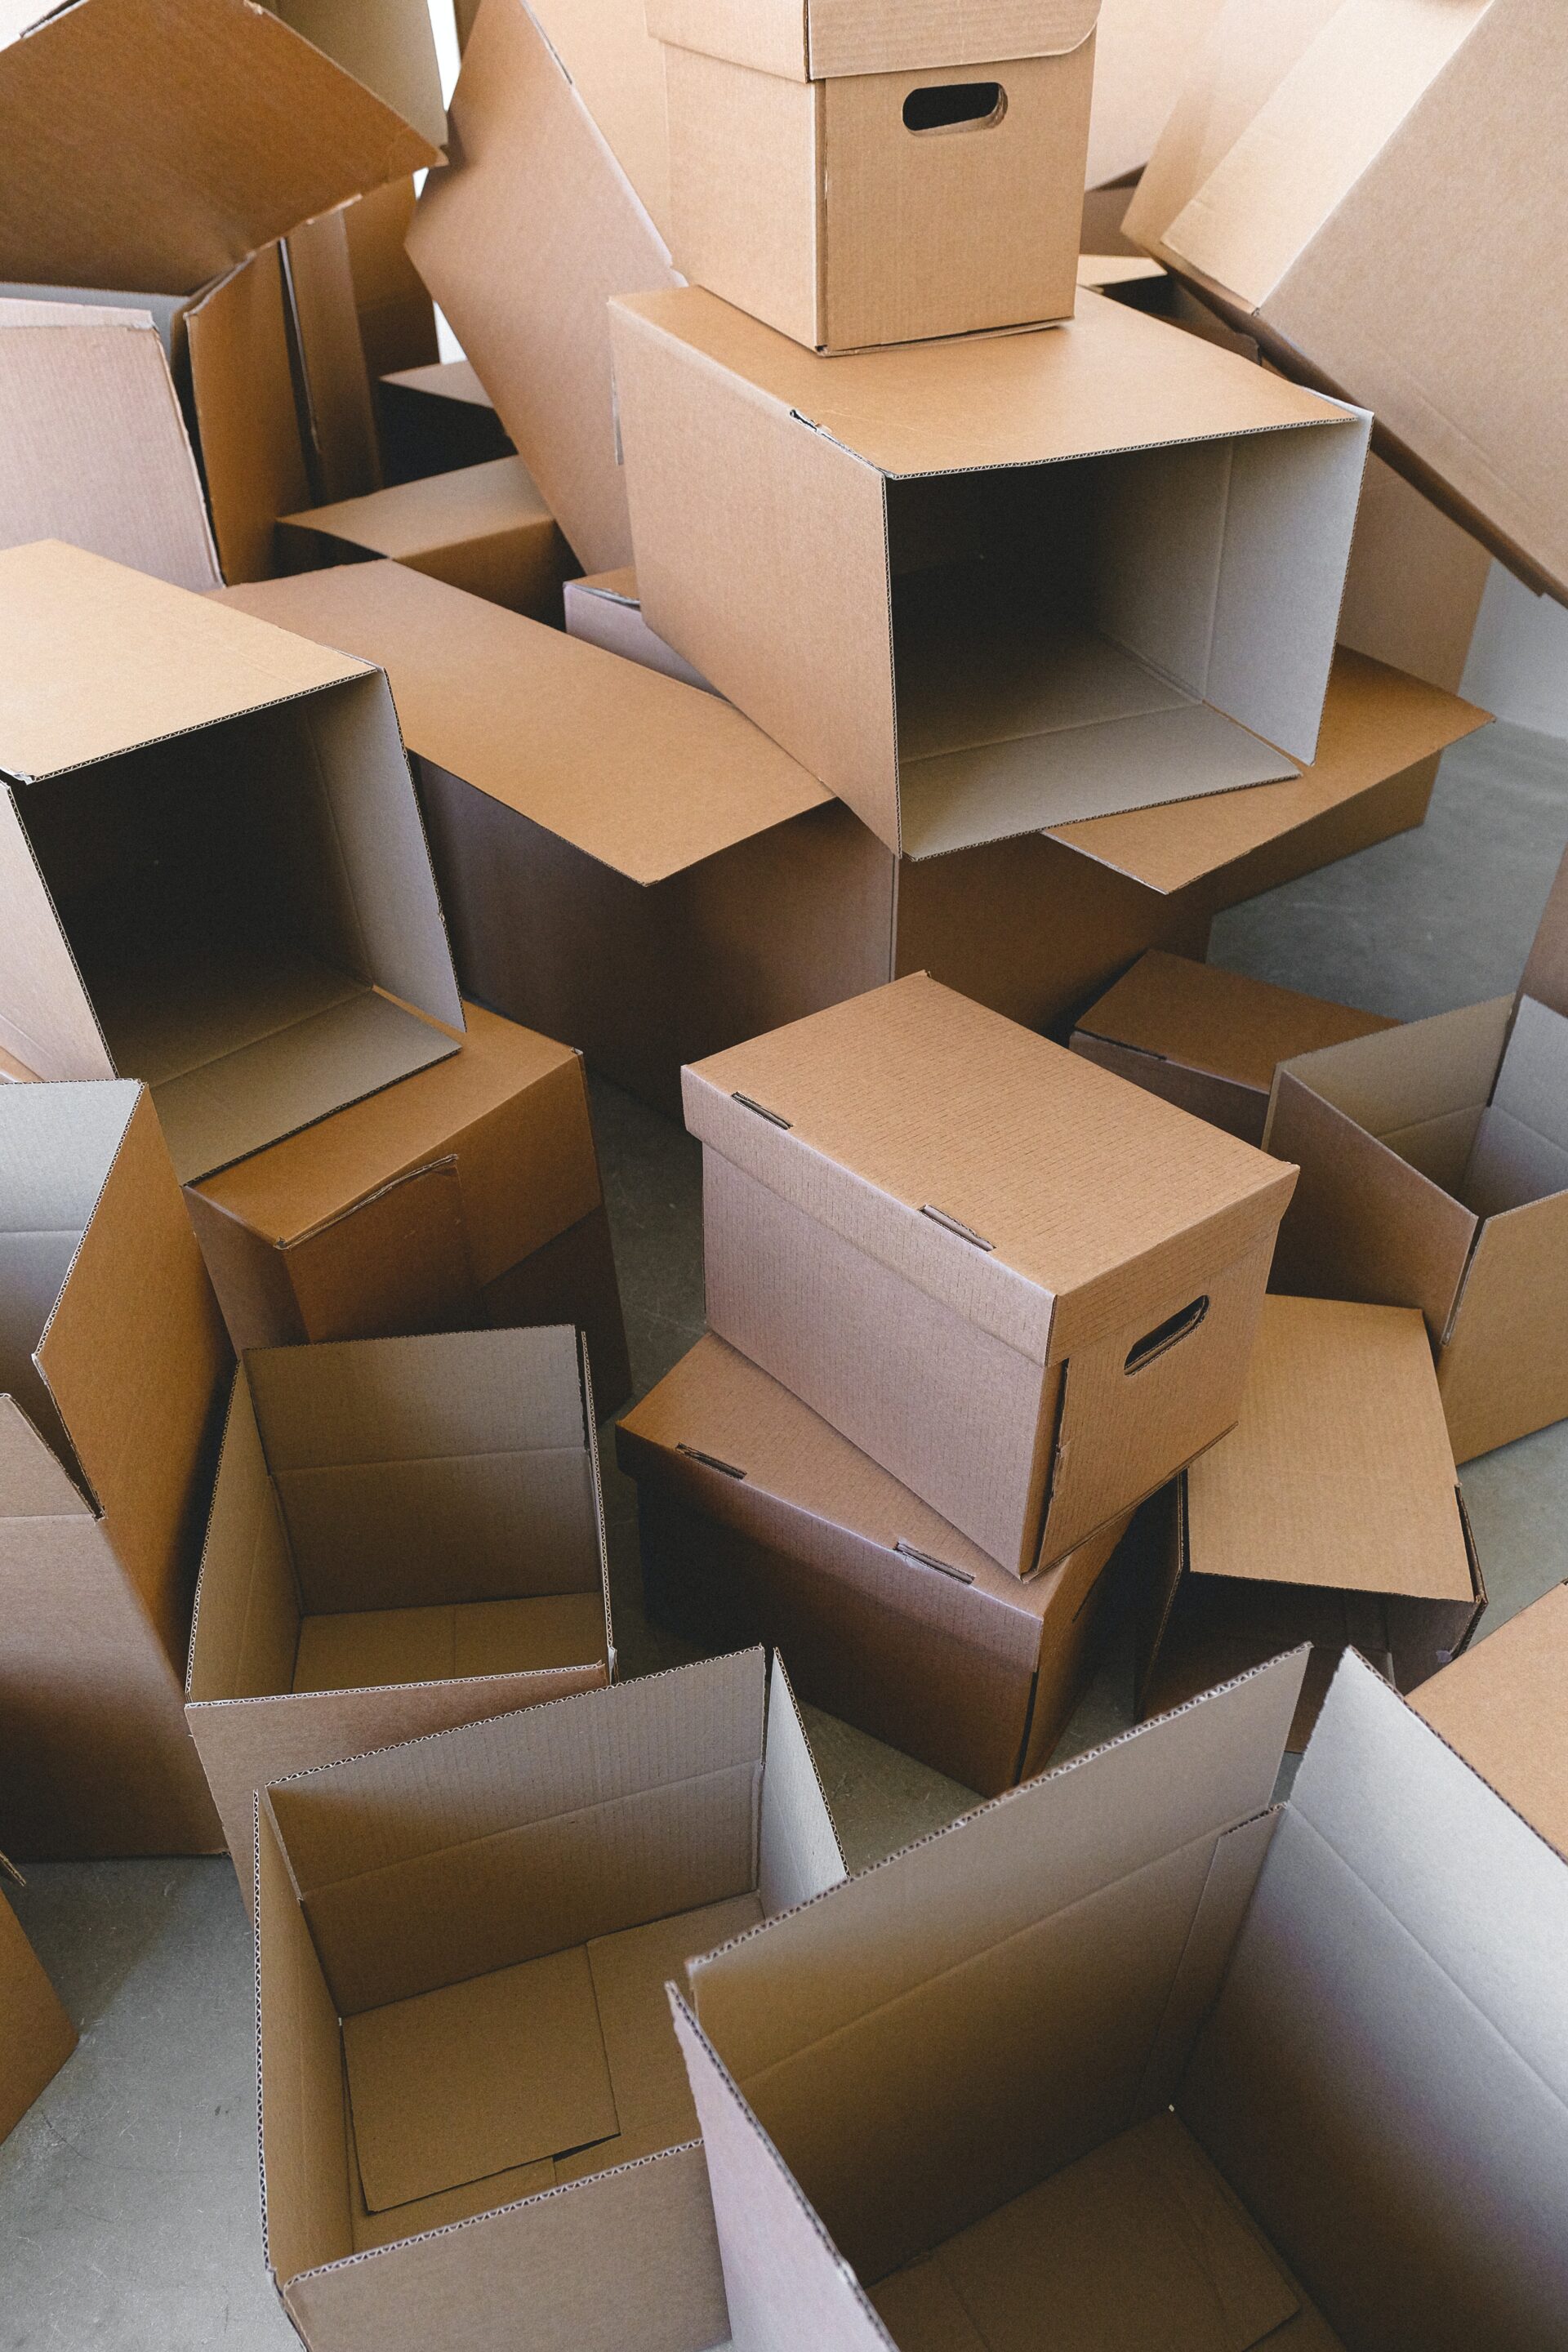 How to recycle your packaging materials after moving house